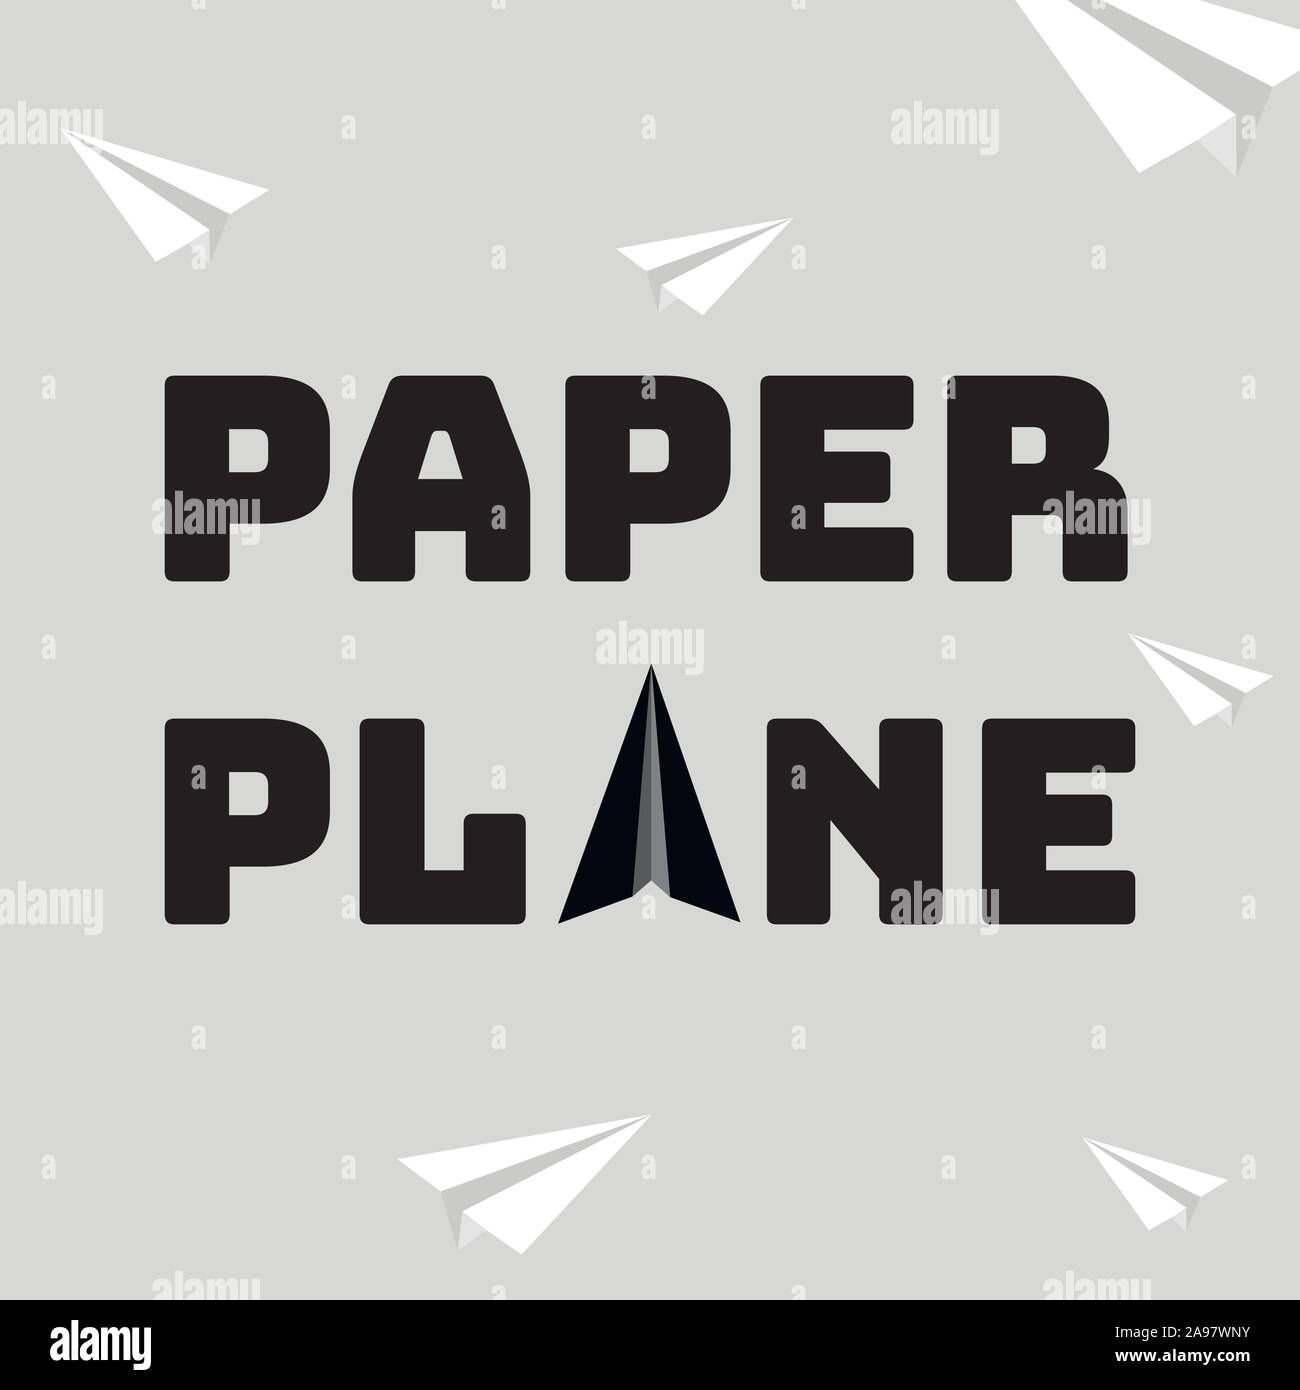 White Paper airplanes flying on blue sky background. Craft design origami style, simply vector graphic illustration for design,icon, logo, background Stock Vector